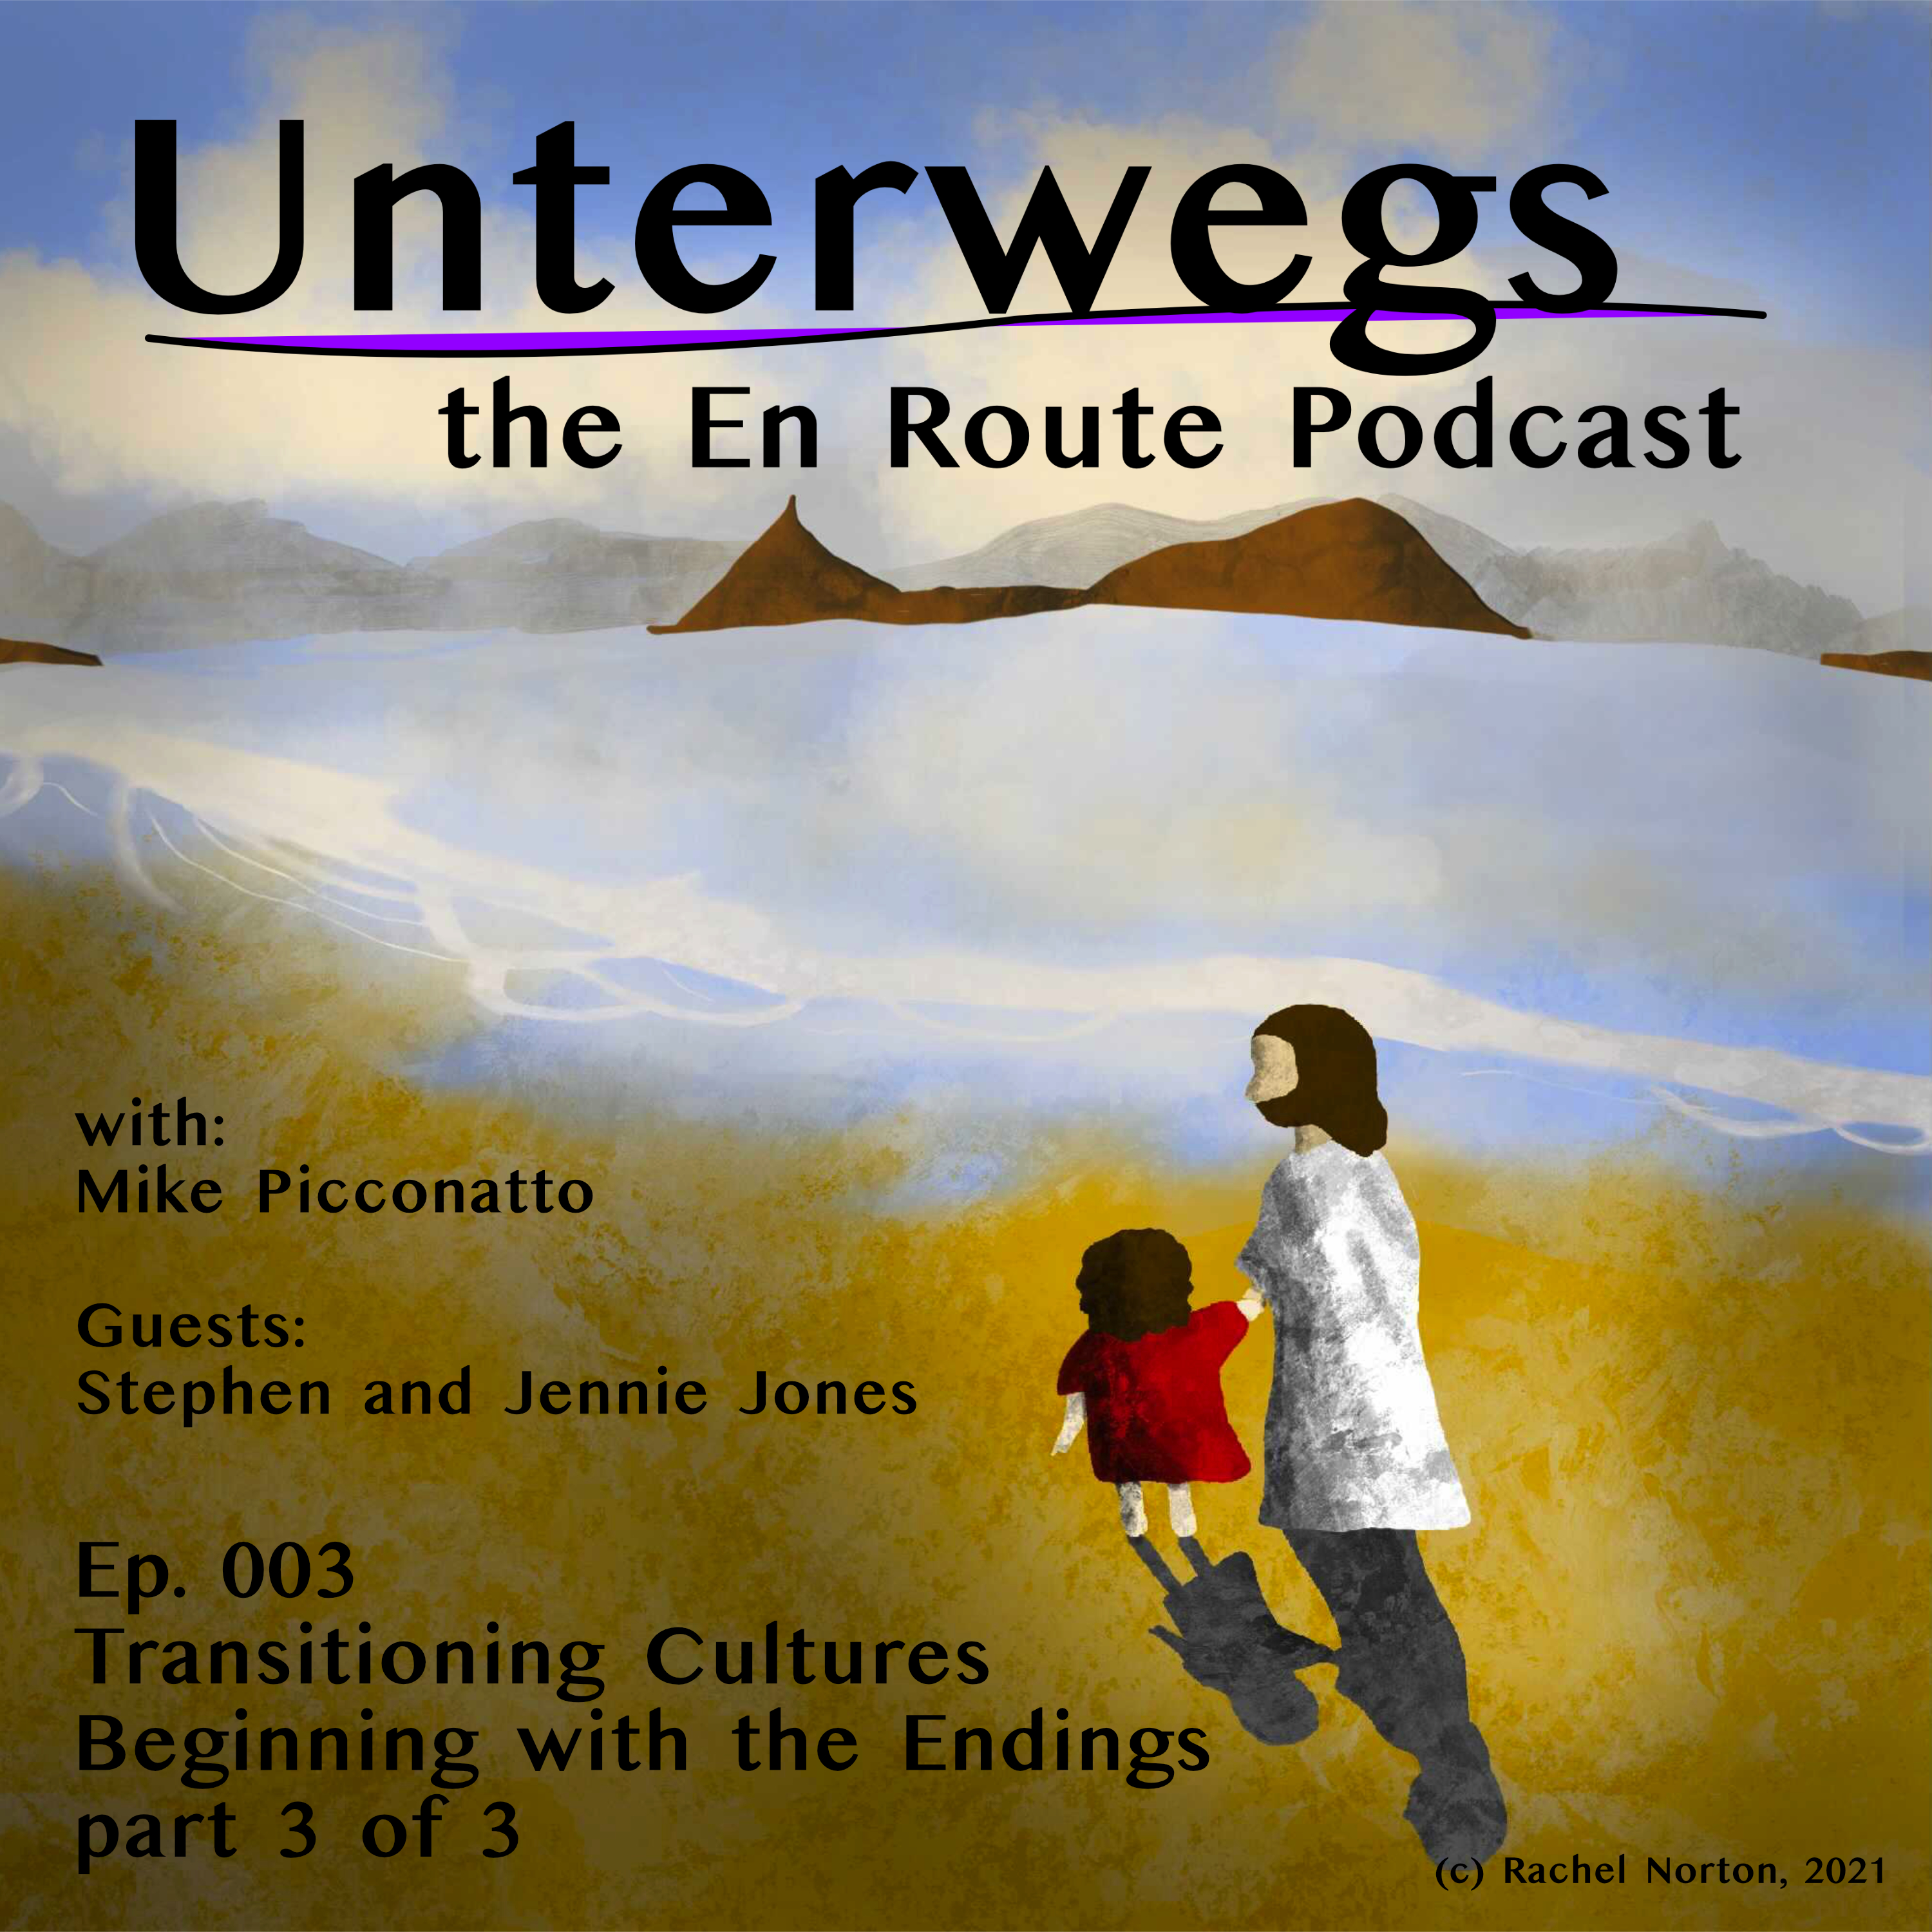 Episode 003 - Beginning with the Endings part 3 of 3